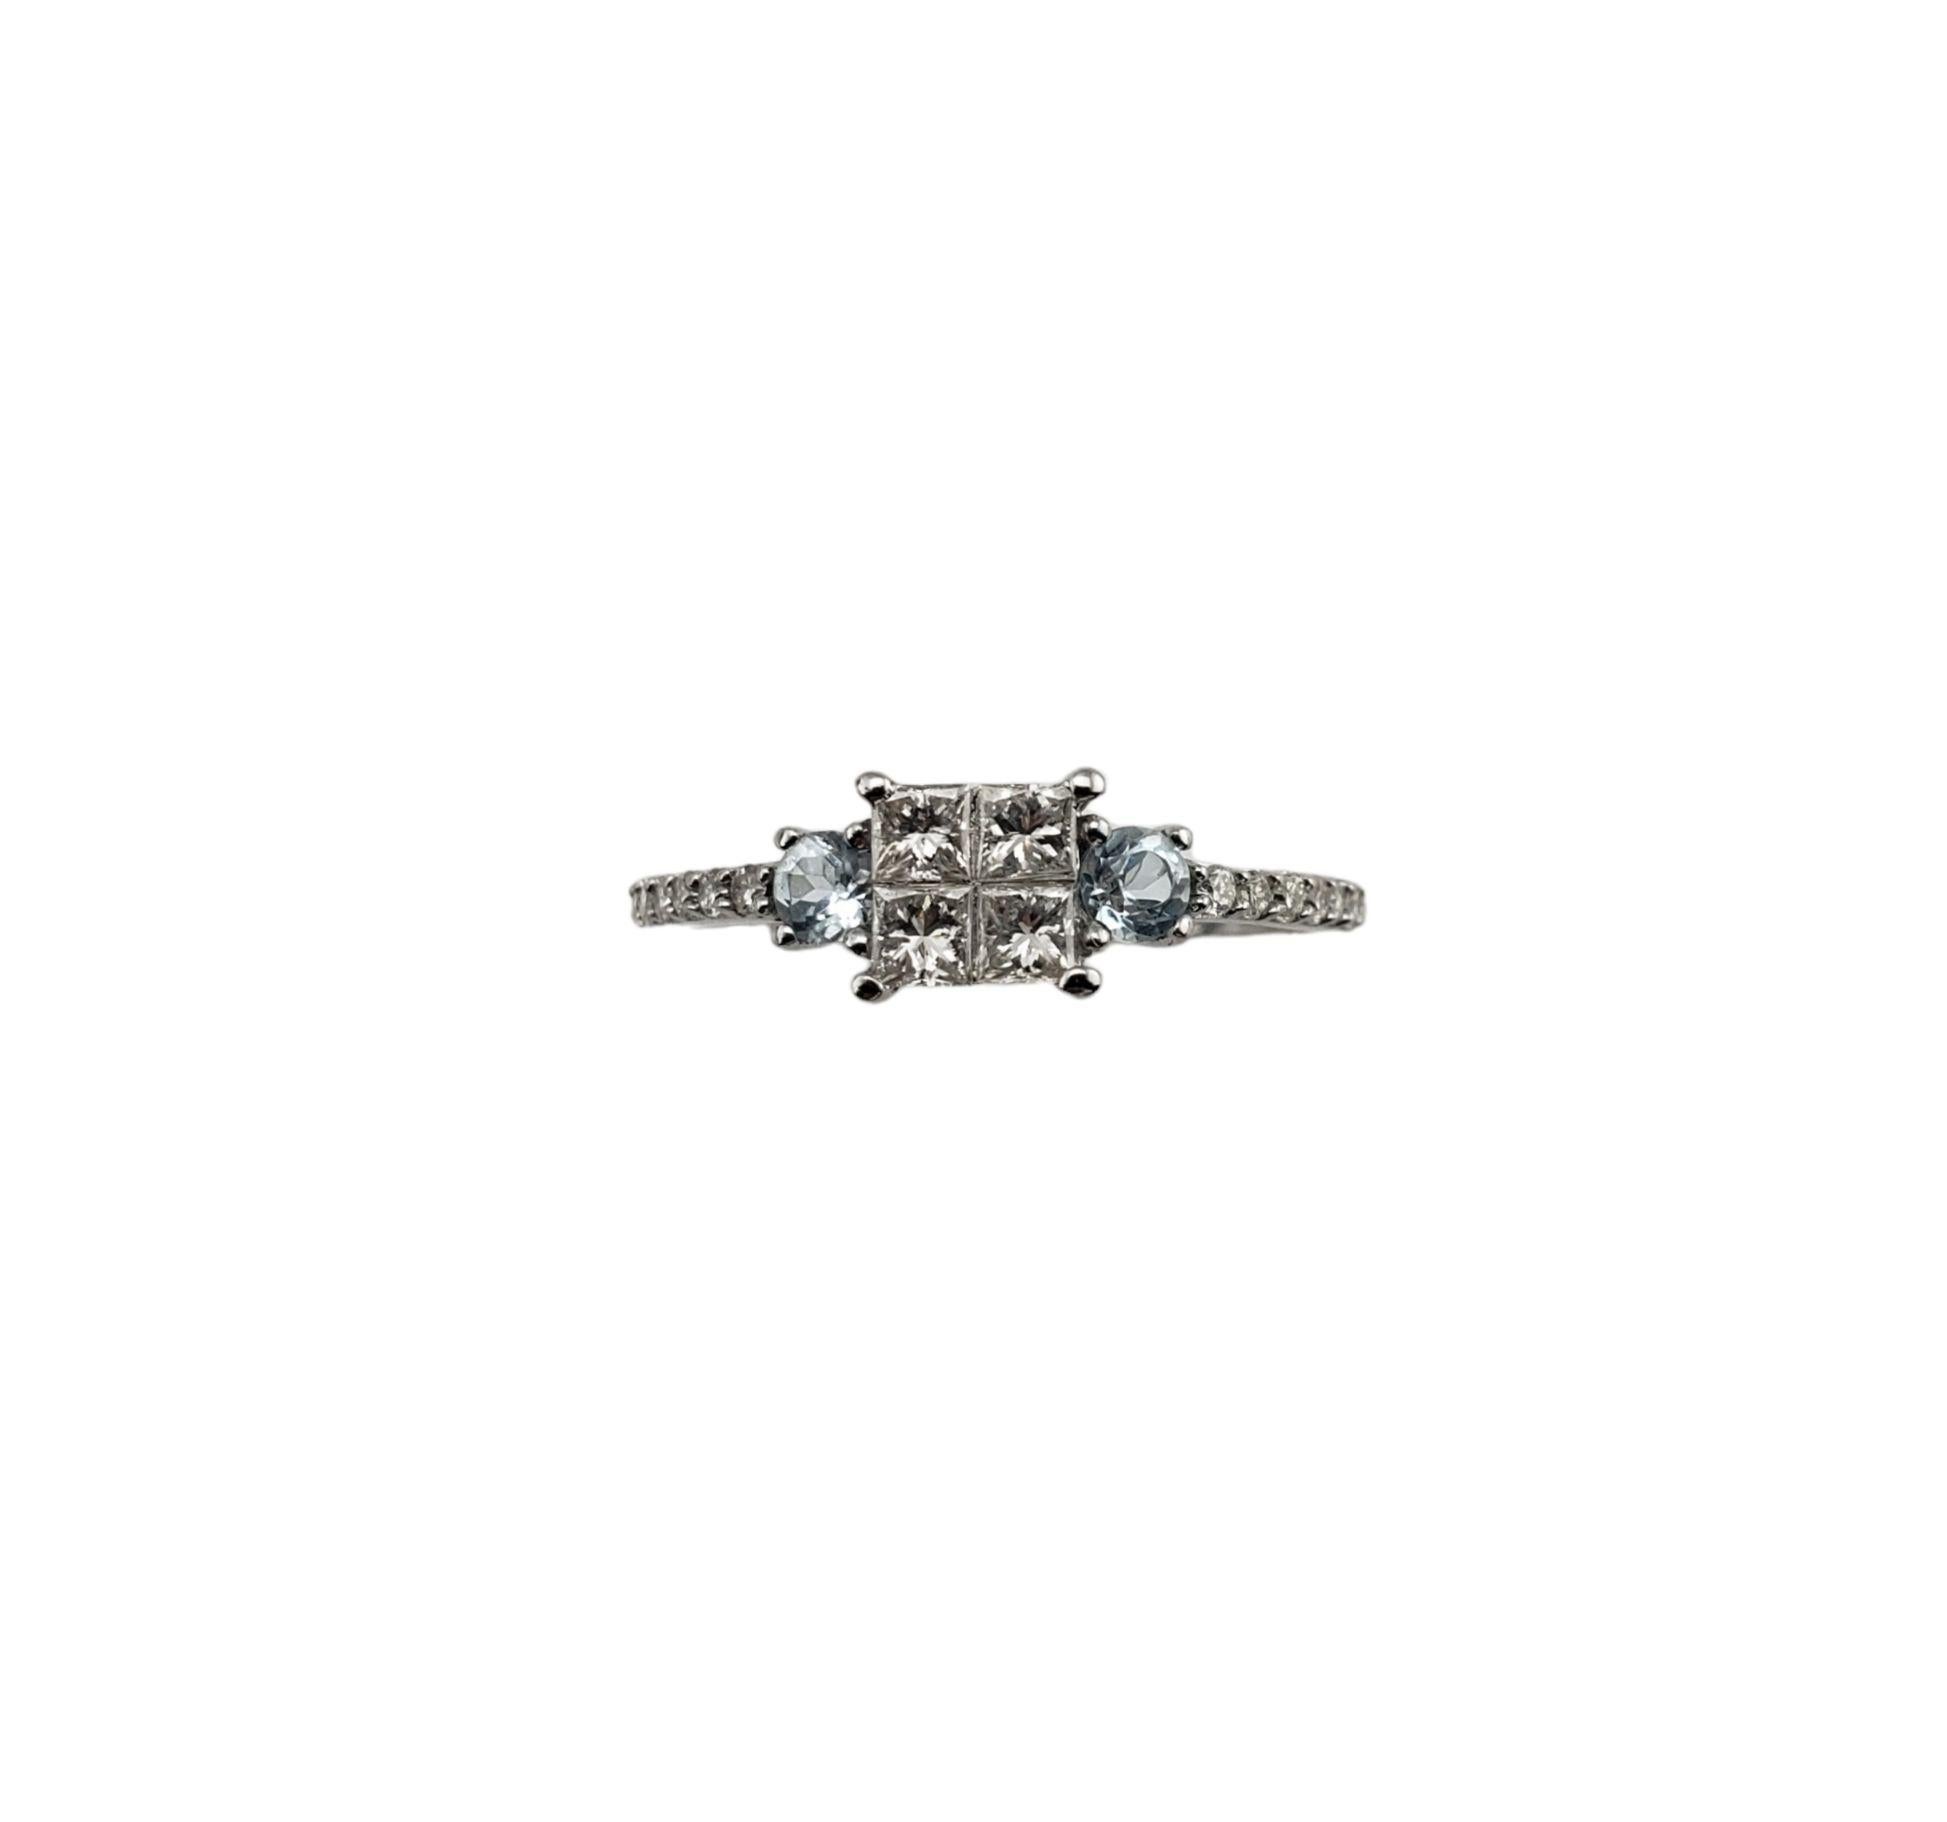 Vintage 14 Karat White Gold Diamond and Aquamarine Ring Size 7 JAGi Certified-

This lovely ring features four princess cut diamonds (.41 tcw.), two round aquamarine stones and 14 round brilliant cut diamonds set in 14K white gold.

Total aquamarine